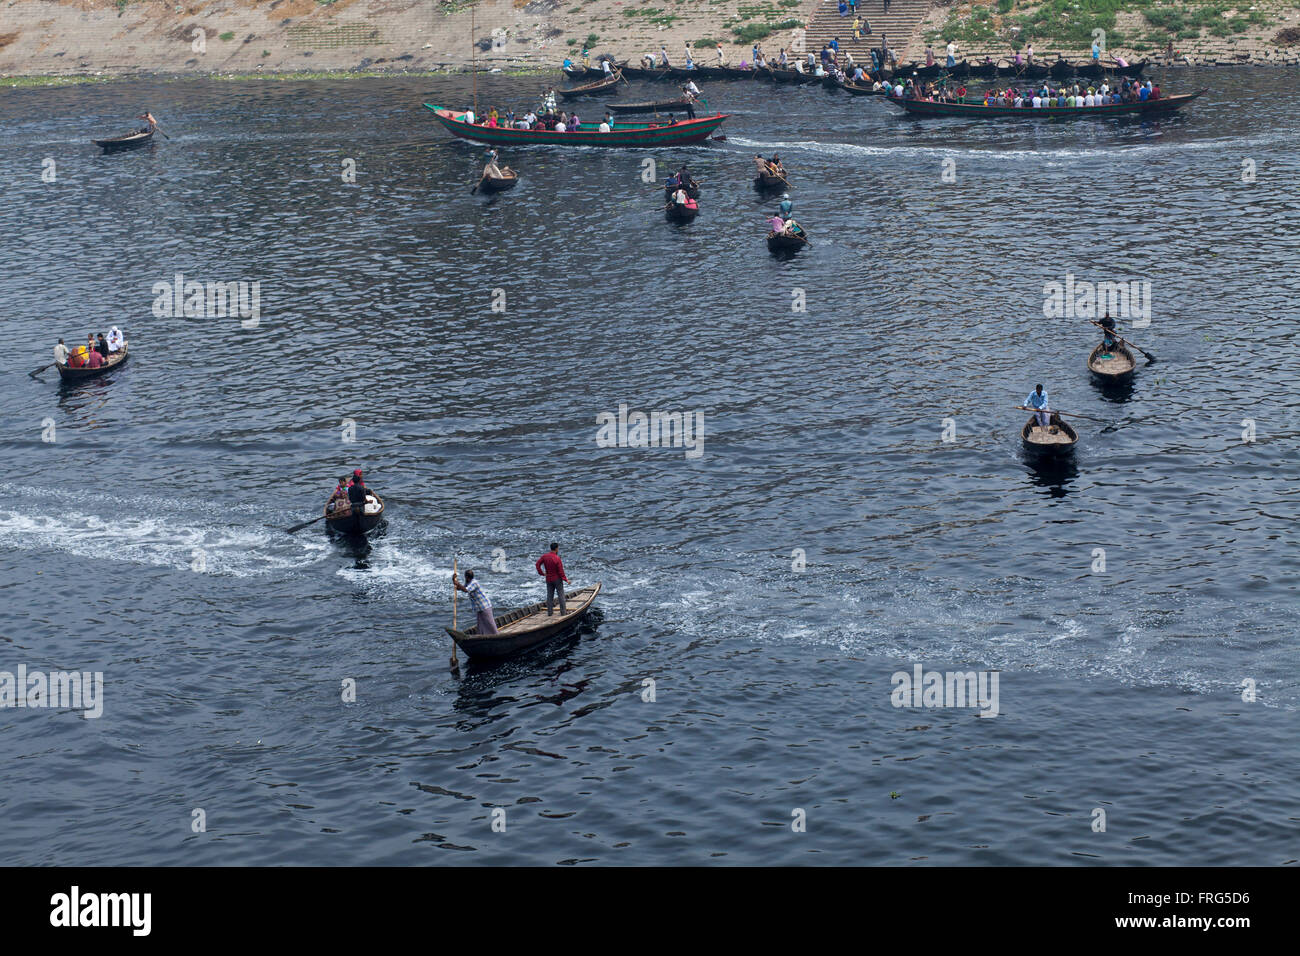 Dhaka, Bangladesh. 21st March, 2016. People ride on boat at the Buriganga river which is full of pitch- black colour water in Dhaka, Bangladesh on March 21, 2016. A large swathe of the Buriganga River which is the lifeline of the capital has turned pitch-black with toxic waste, oil and chemicals flowing into it from industrial units.  Buriganga river, which flows by Dhaka is now one of the most polluted and biologically dead rivers in Bangladesh. Credit:  zakir hossain chowdhury zakir/Alamy Live News Stock Photo